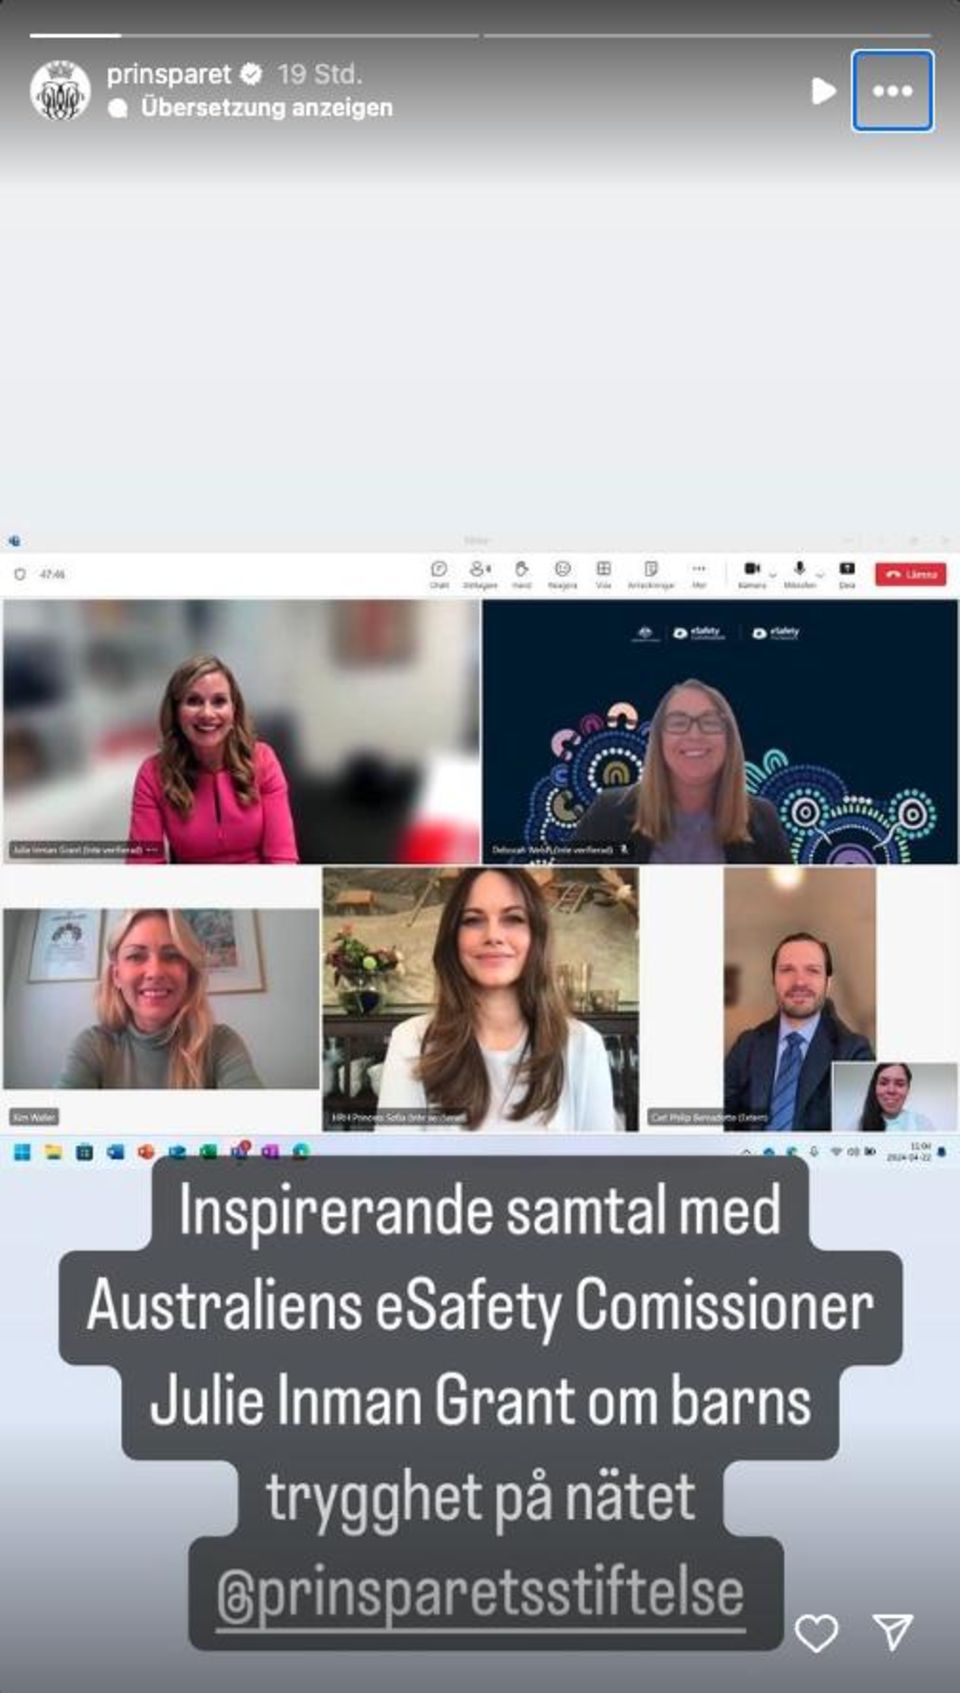 Princess Sofia and Prince Carl Philip discuss child safety online during an online meeting with Australia's eSafety Commissioner Julie Inman Grant